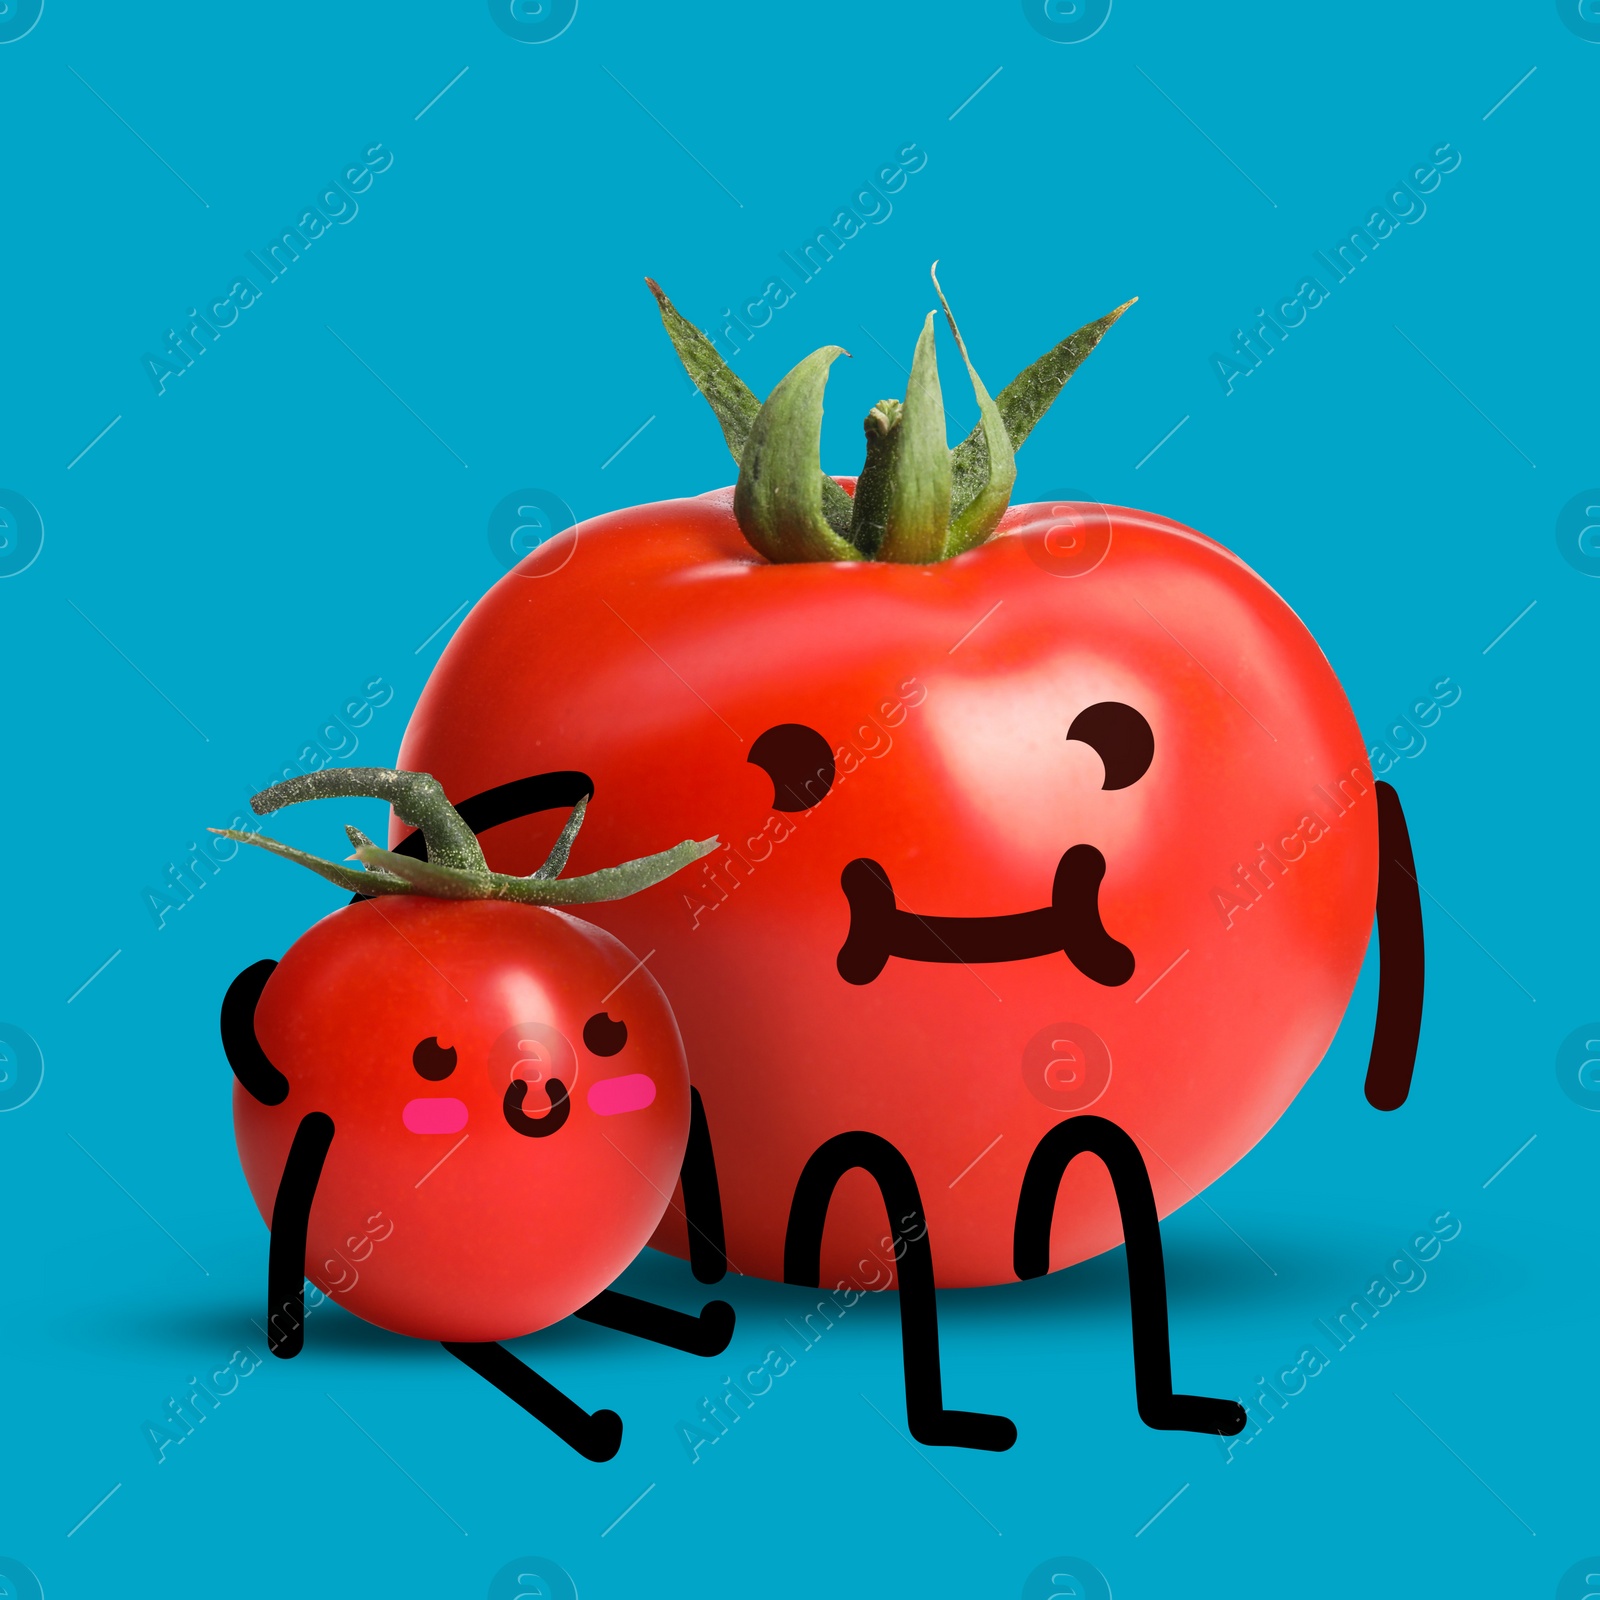 Image of Creative artwork. Parent and child tomatoes hugging on light blue background. Objects with drawings on light blue background